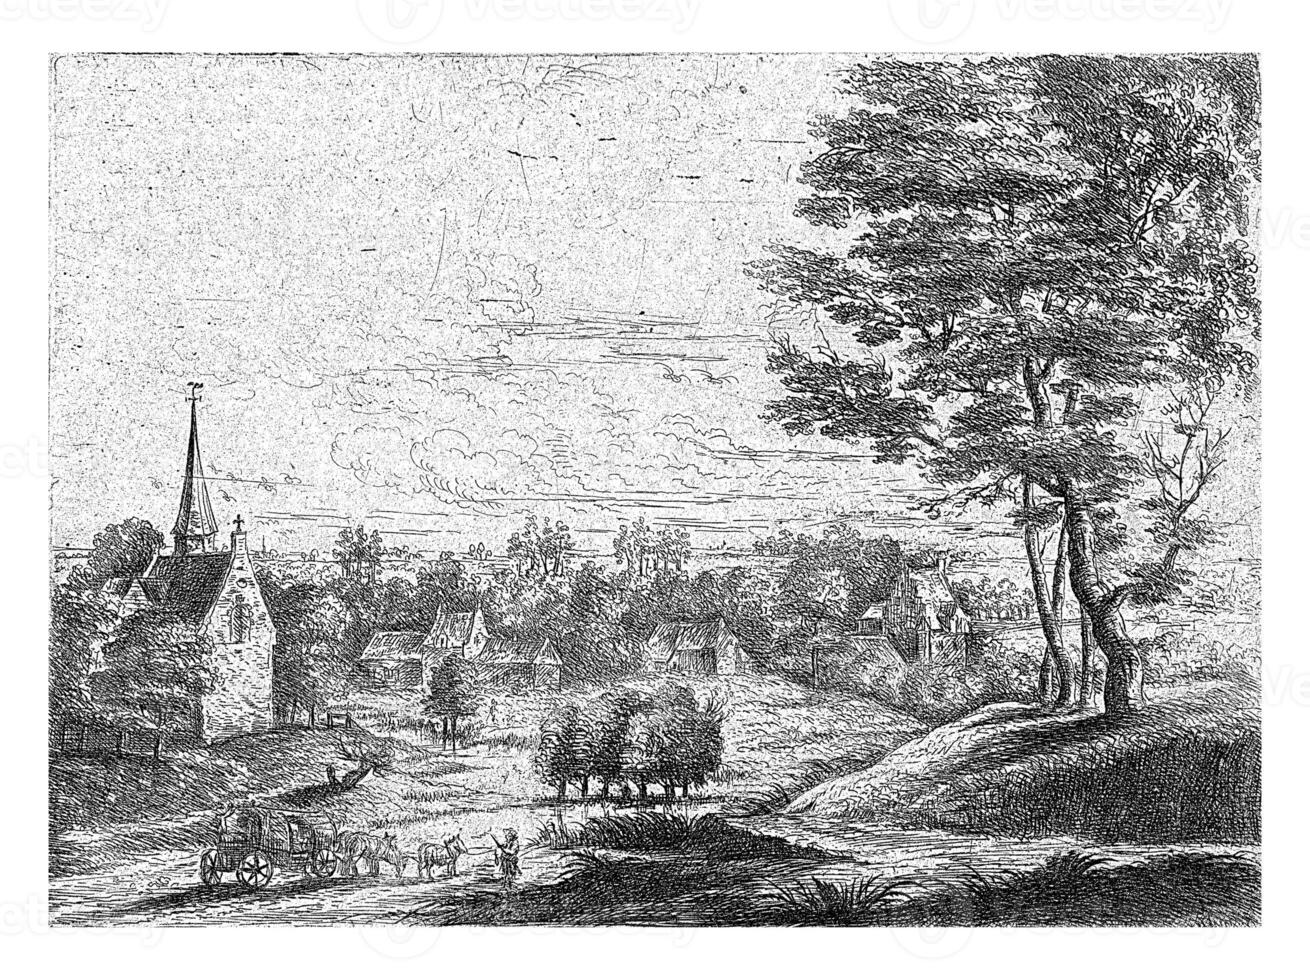 View of a Village with a Covered Wagon, Lucas van Uden, 1605 - 1673 photo